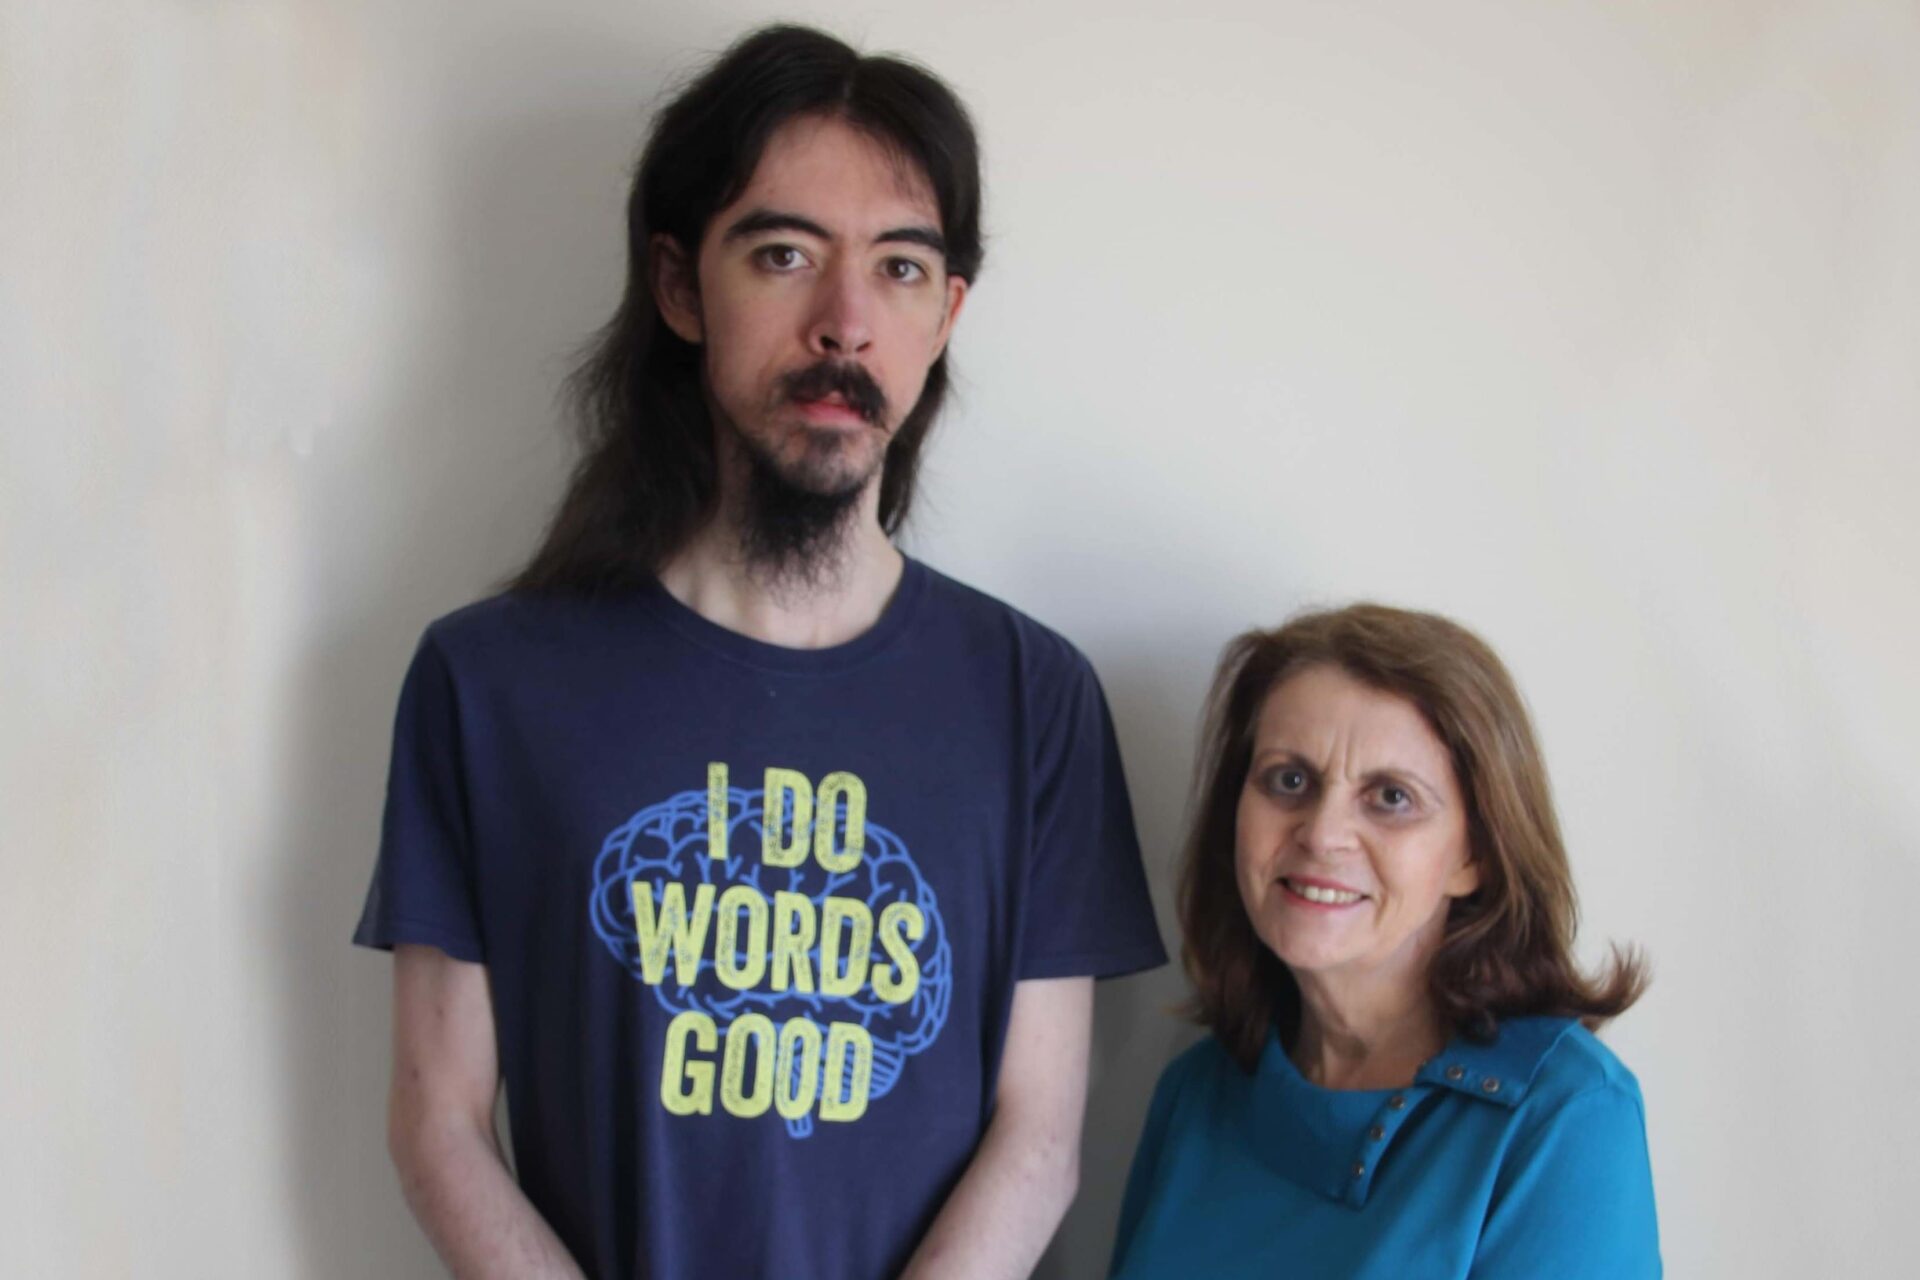 A mother’s encouragement helped land her autistic son a job in IT